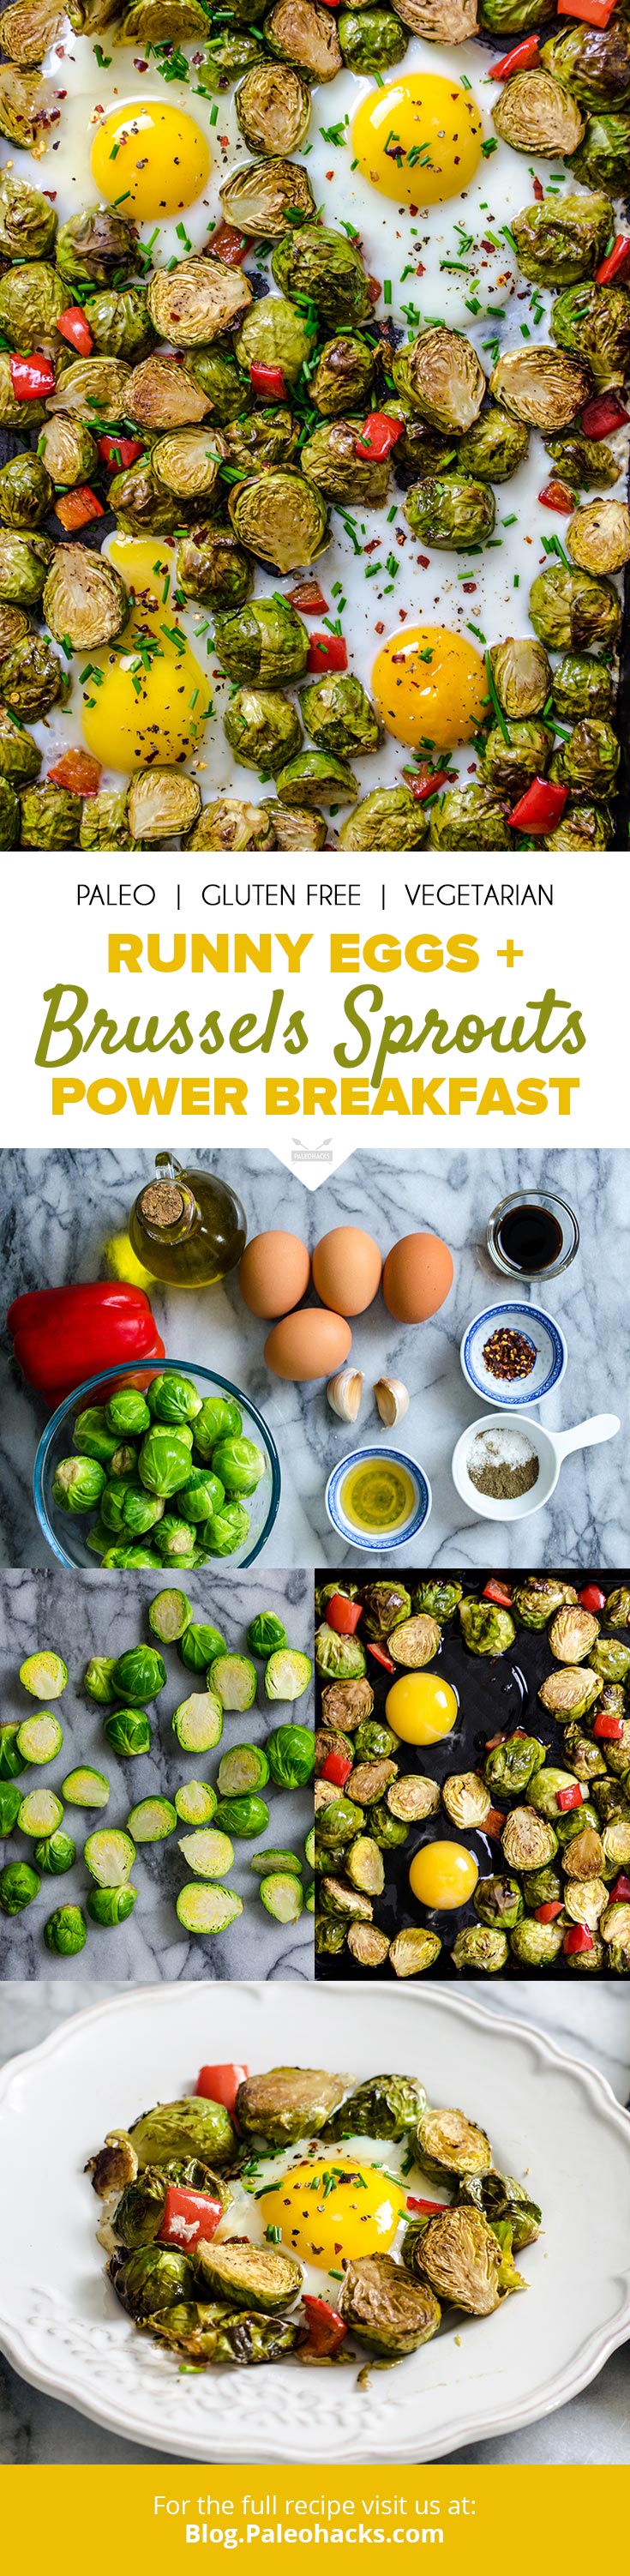 Roast Brussels sprouts, eggs and fresh bell peppers in one tray for an easy breakfast with leftovers to spare.